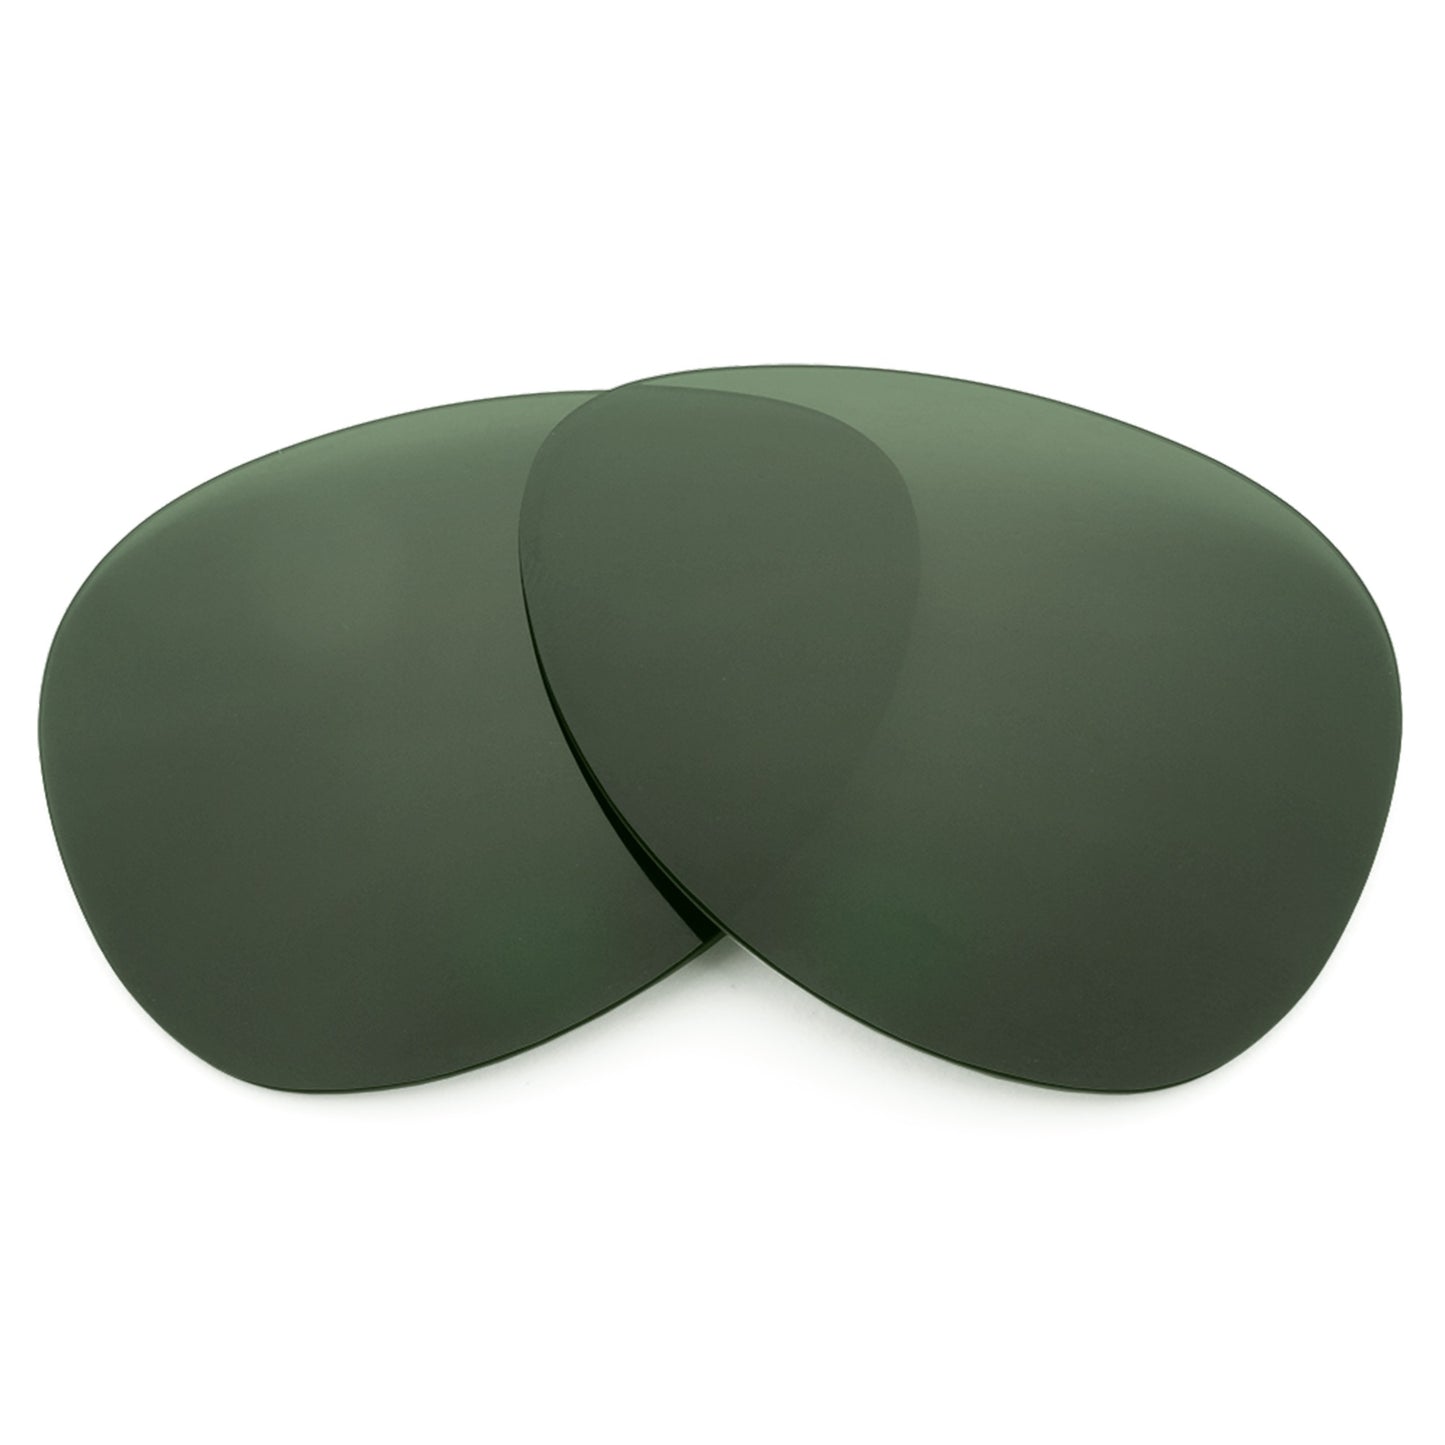 Revant replacement lenses for Ray-Ban Outdoorsman II RB3029 62mm Non-Polarized Gray Green